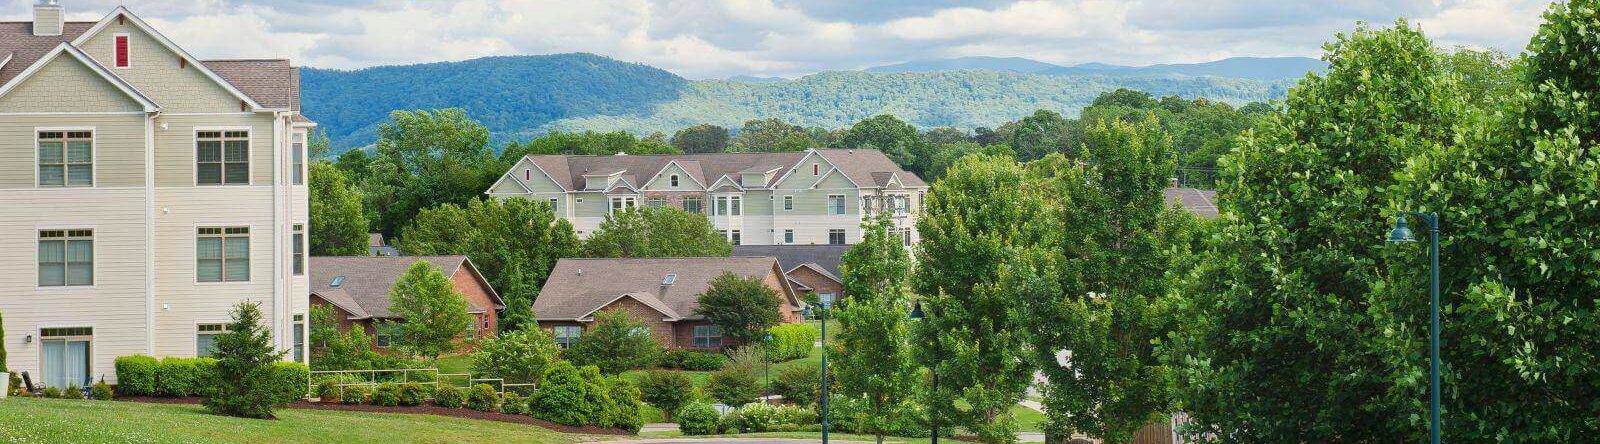 Welcome to Asbury Place Maryville, an active adult community in Maryville, PA.